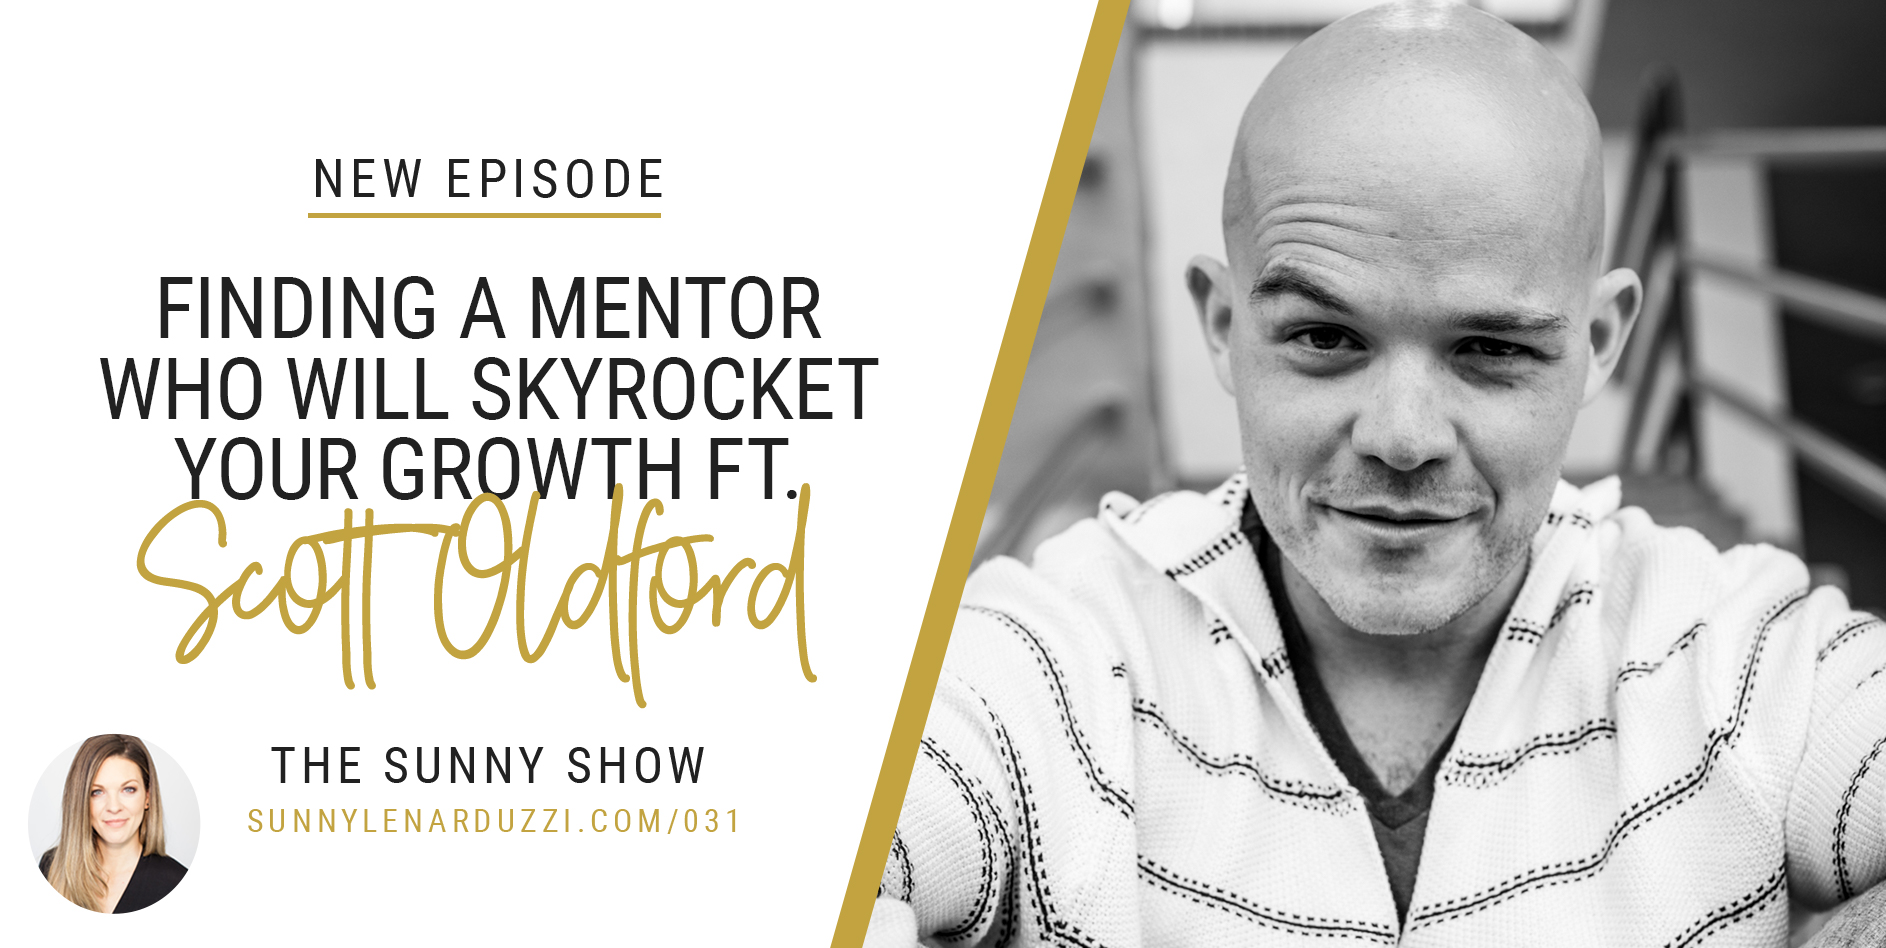 Finding a Mentor who will Skyrocket your Growth ft. Scott Oldford